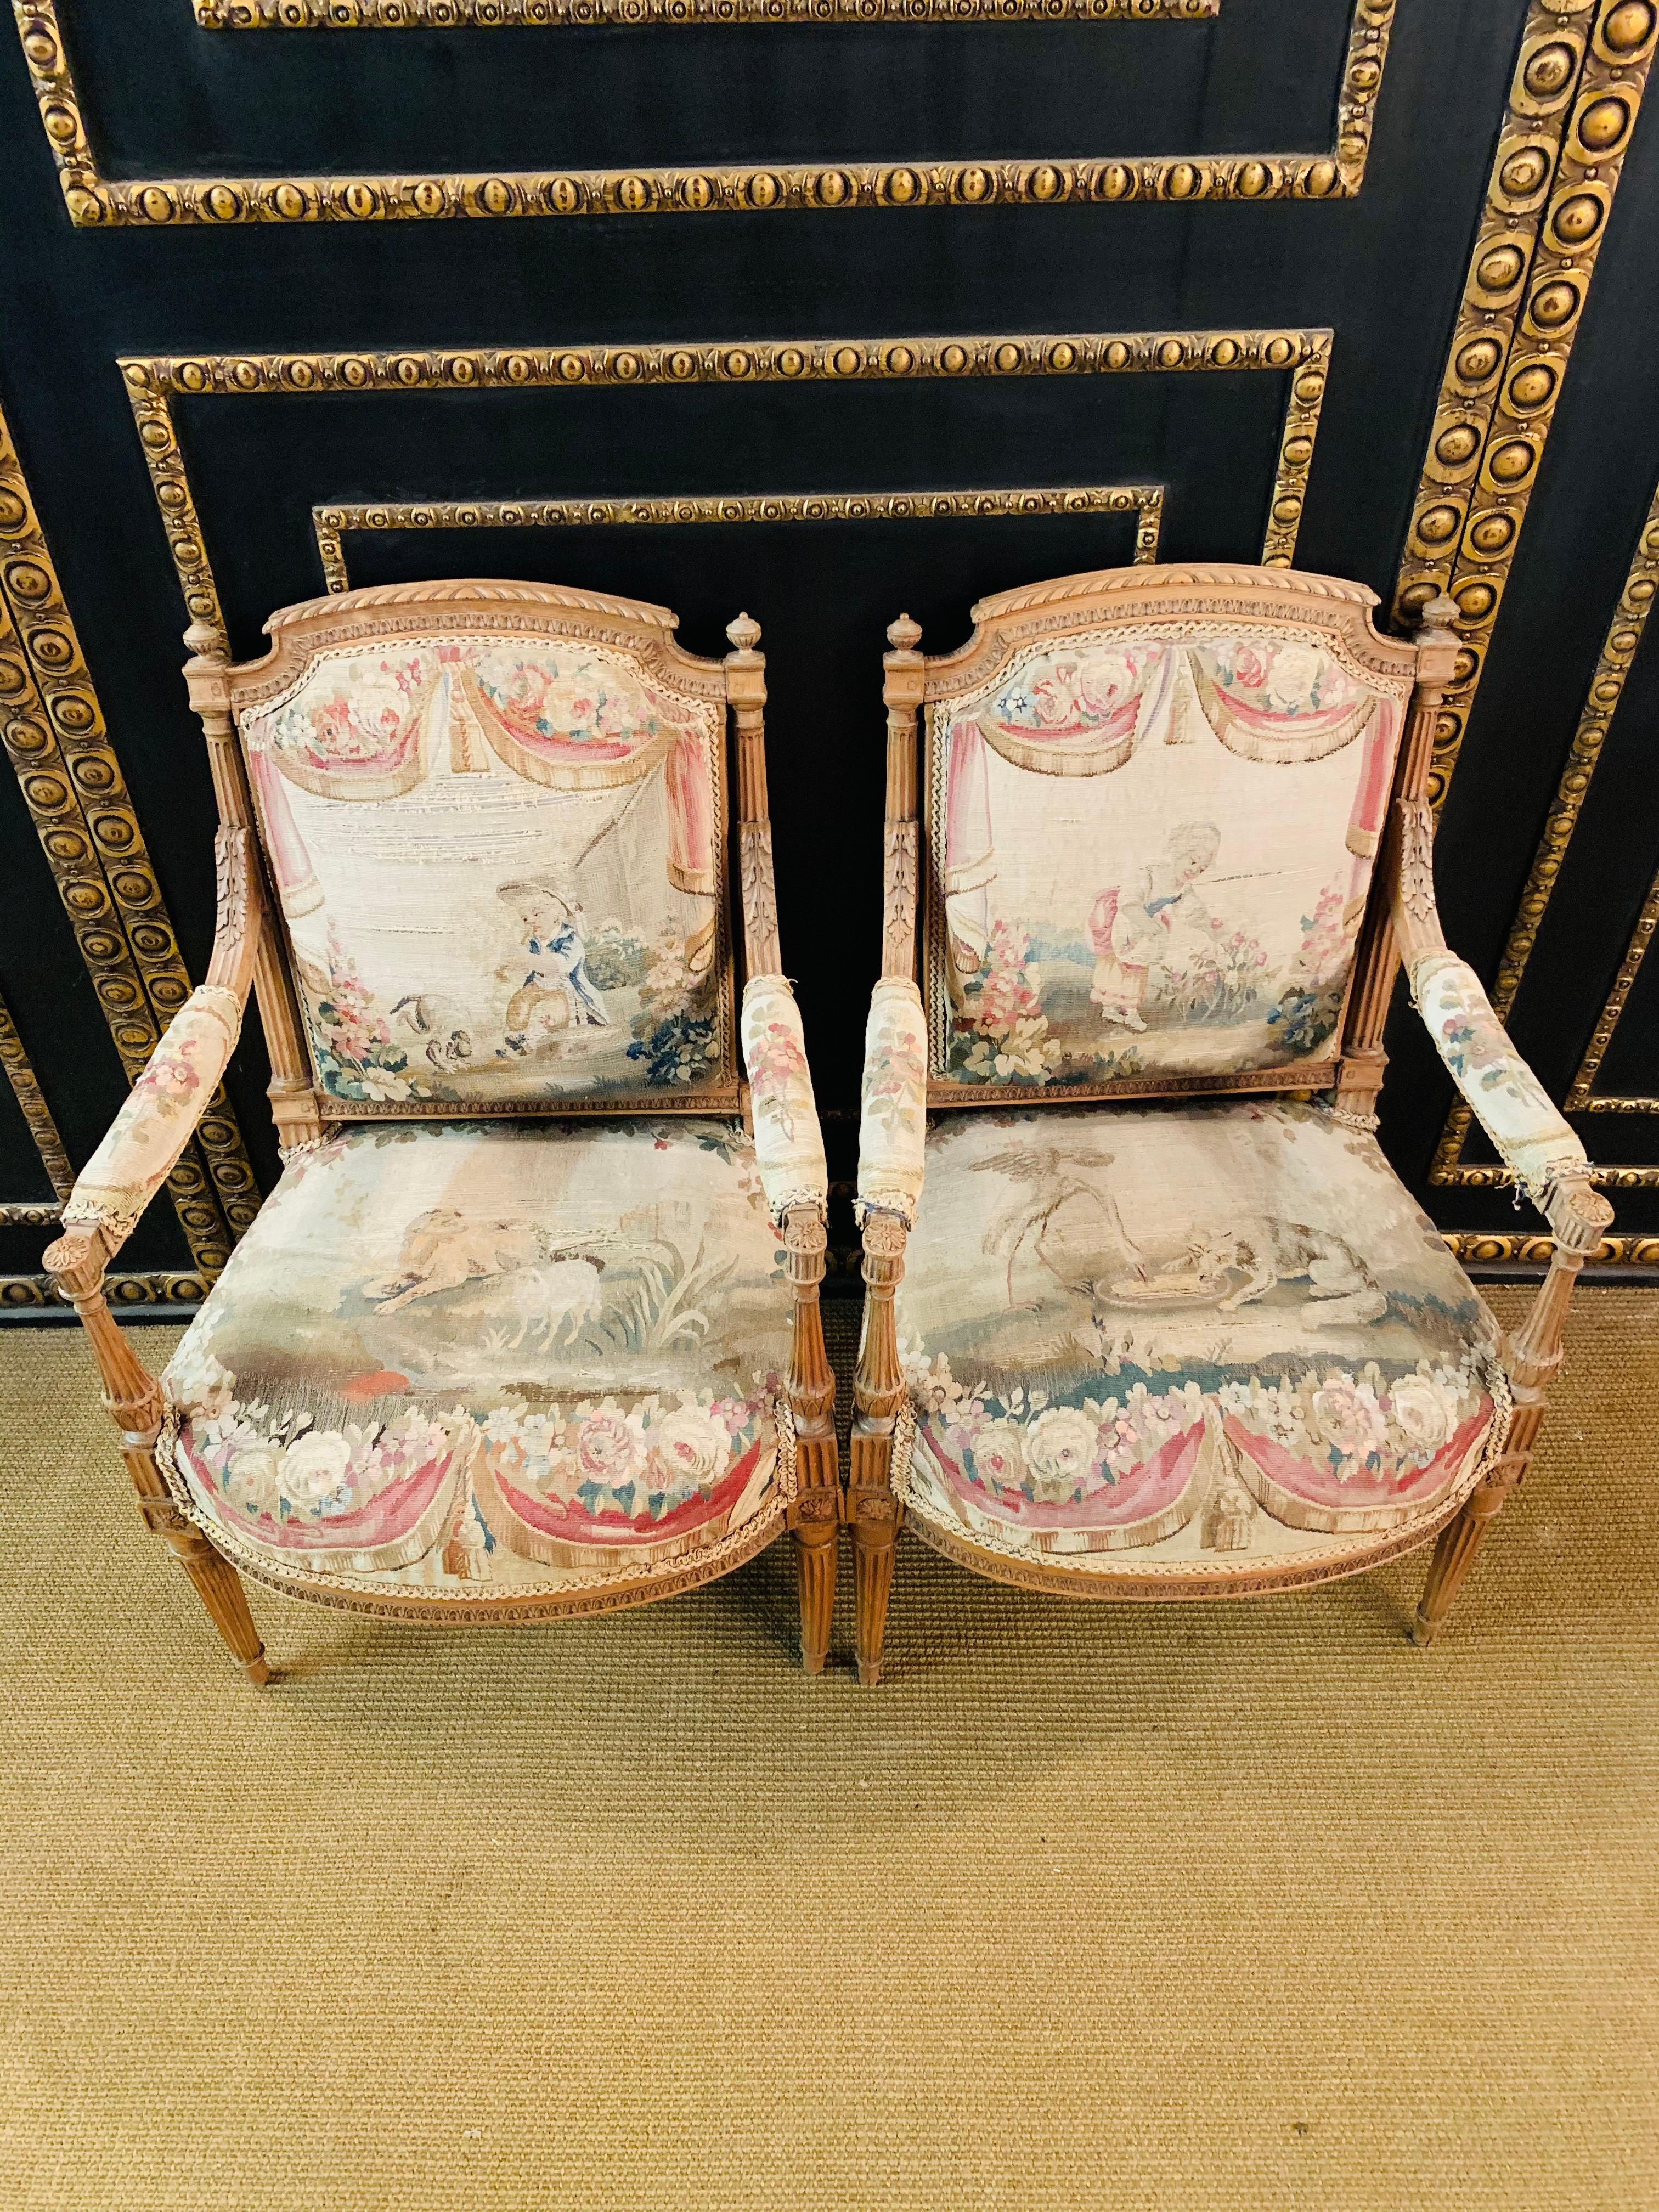 Pair of lounge chairs, Paris France 19th century, classical style, beech with solid oak, tapestry cover somewhat damaged.
 Gobelin fabric cover: Decorative floral bouquets and figures, Aubusson tapestry. 

 Dimensions in cm: 
Width 59cm
Depth